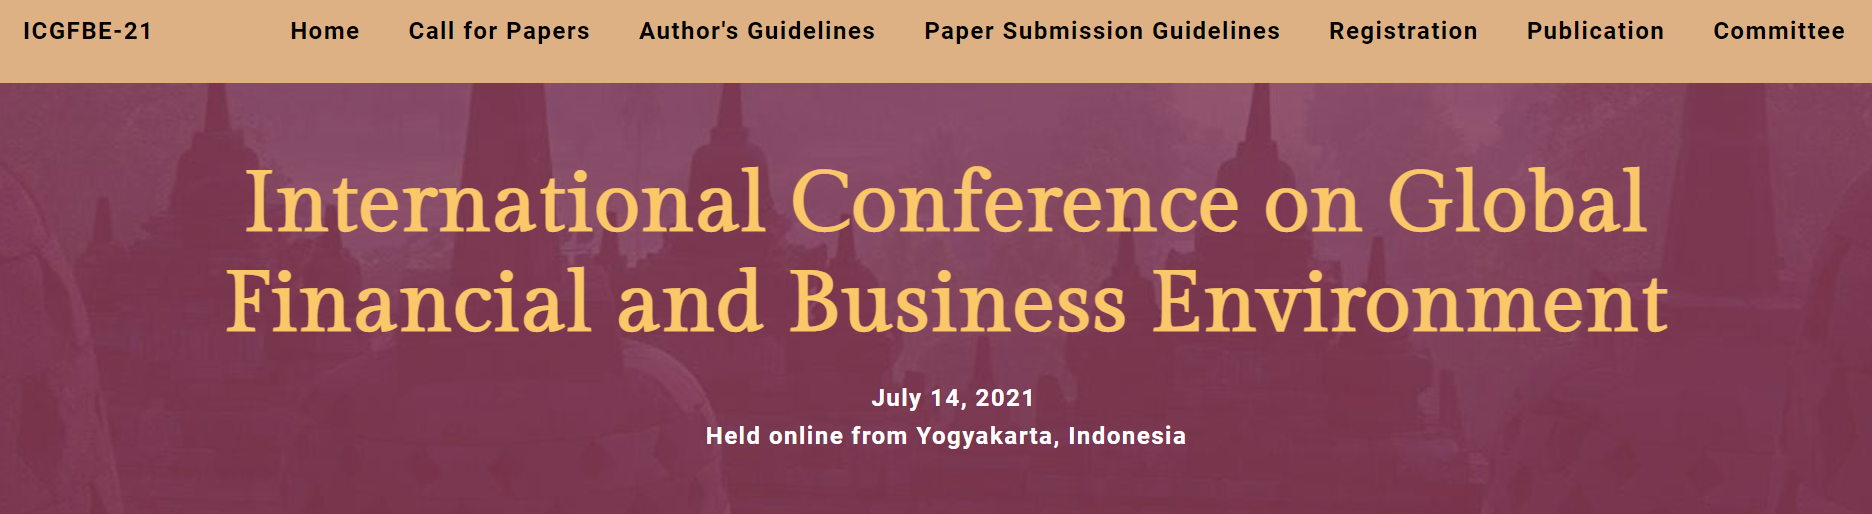 International Conference on Global Financial and Business Environment, Yogyakarta, Indonesia